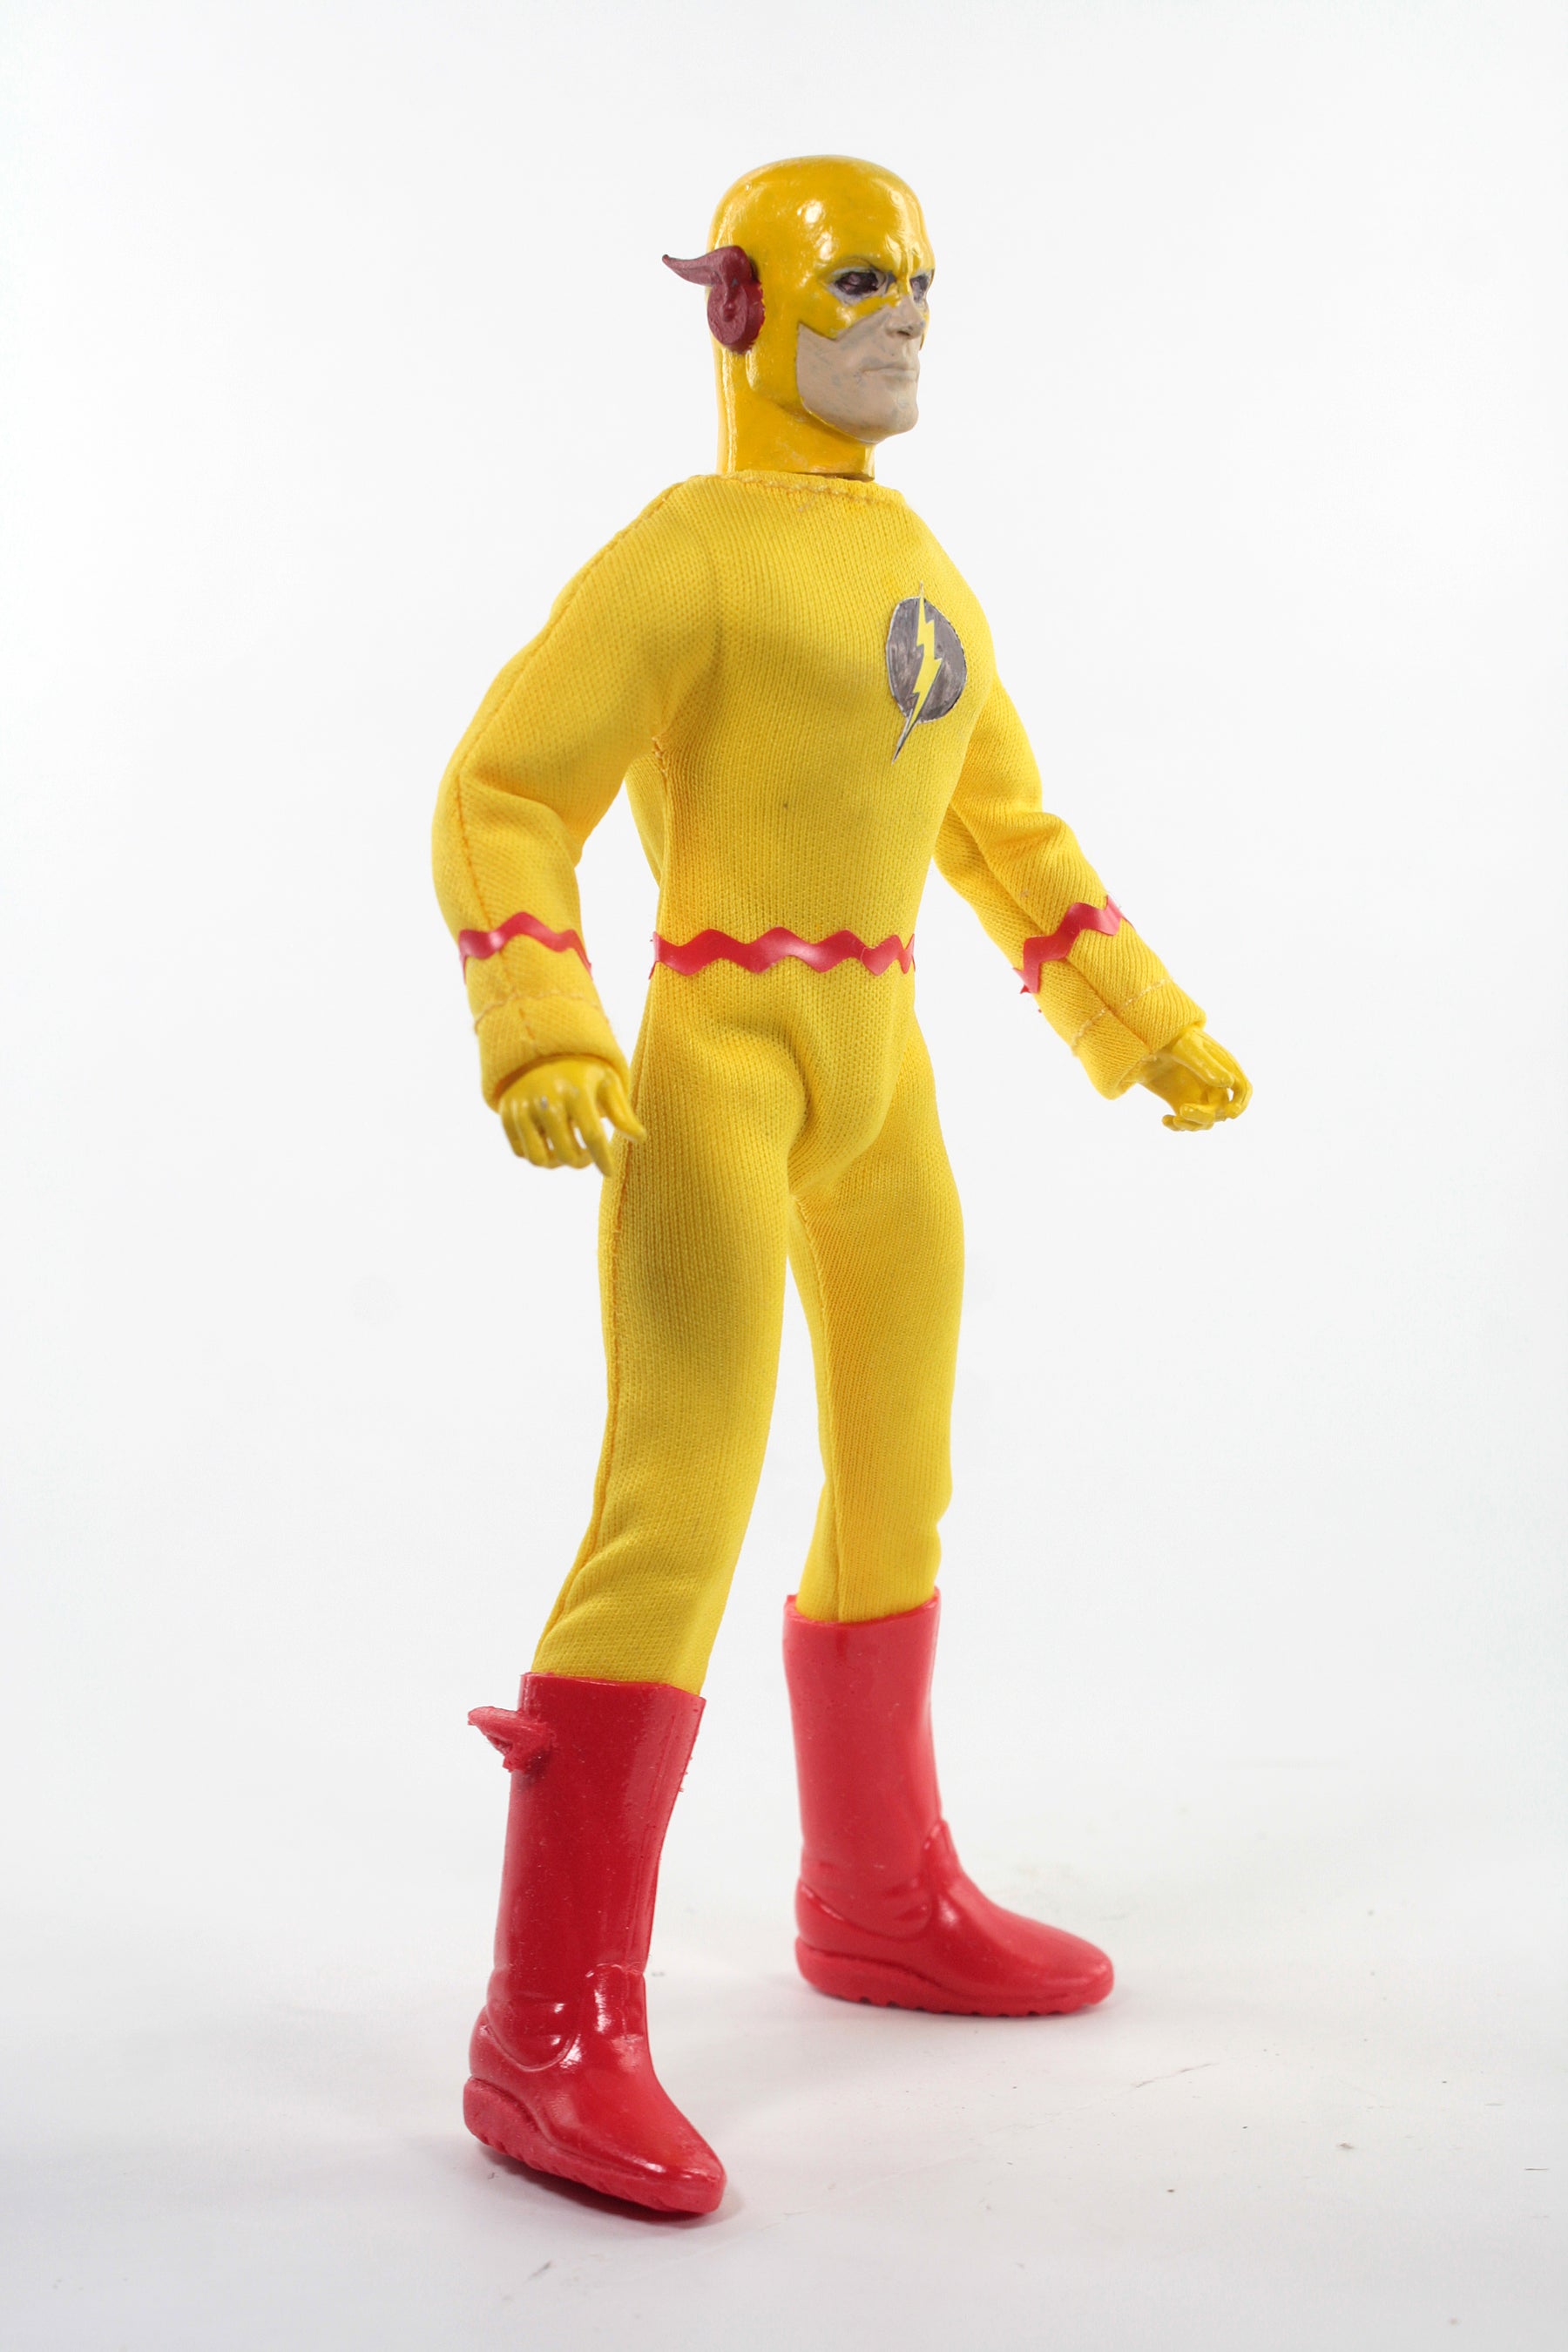 Mego Wave 17 - Reverse Flash 50th Anniversary World's Greatest Superheroes (Classic Box) 8" Action Figure